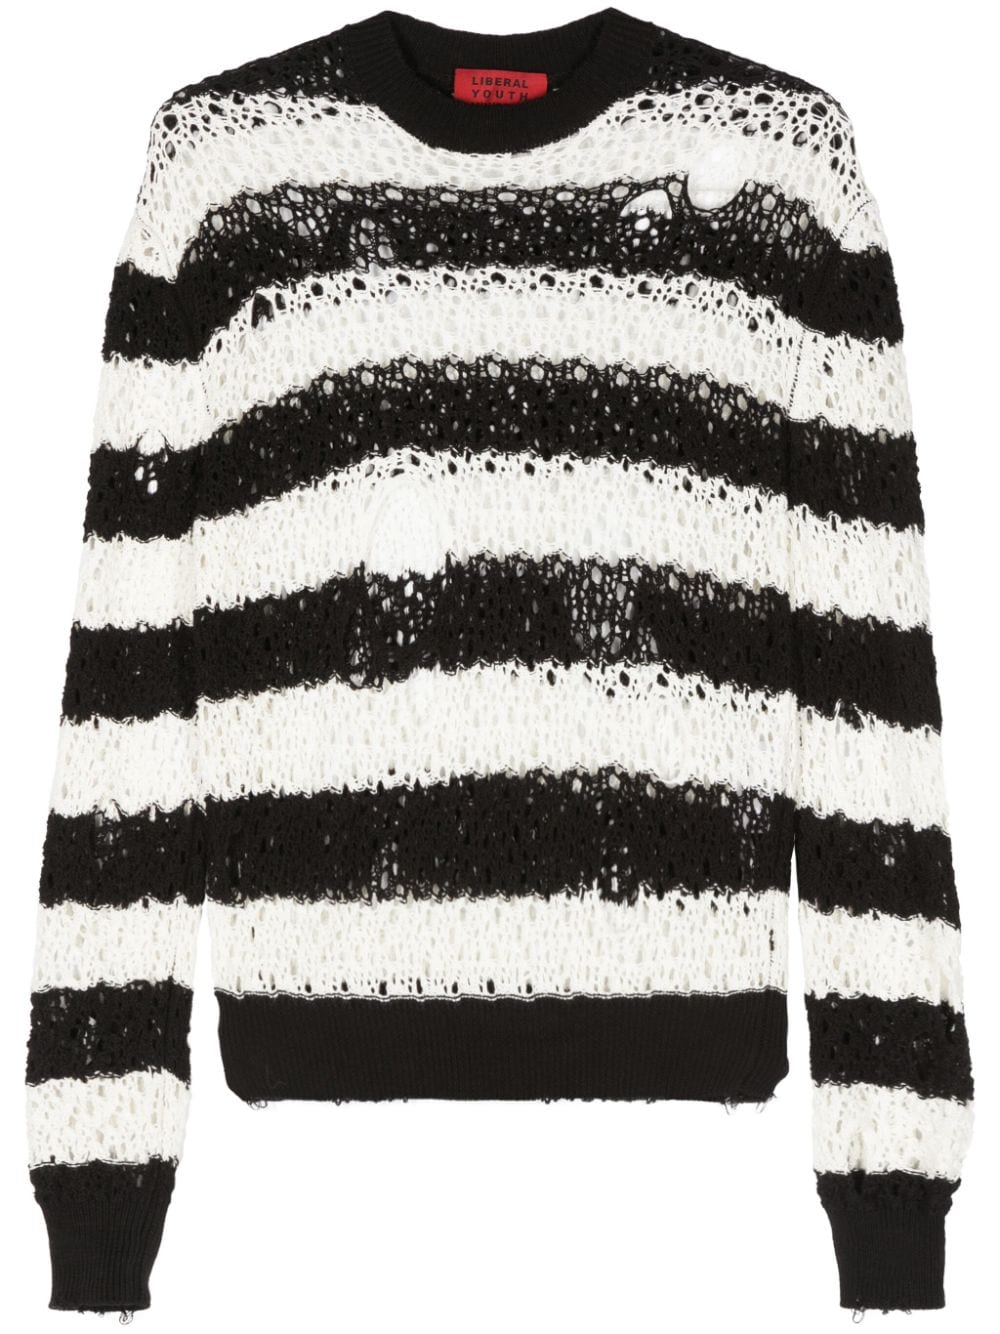 Liberal Youth Ministry striped cut-out detail jumper - Black von Liberal Youth Ministry